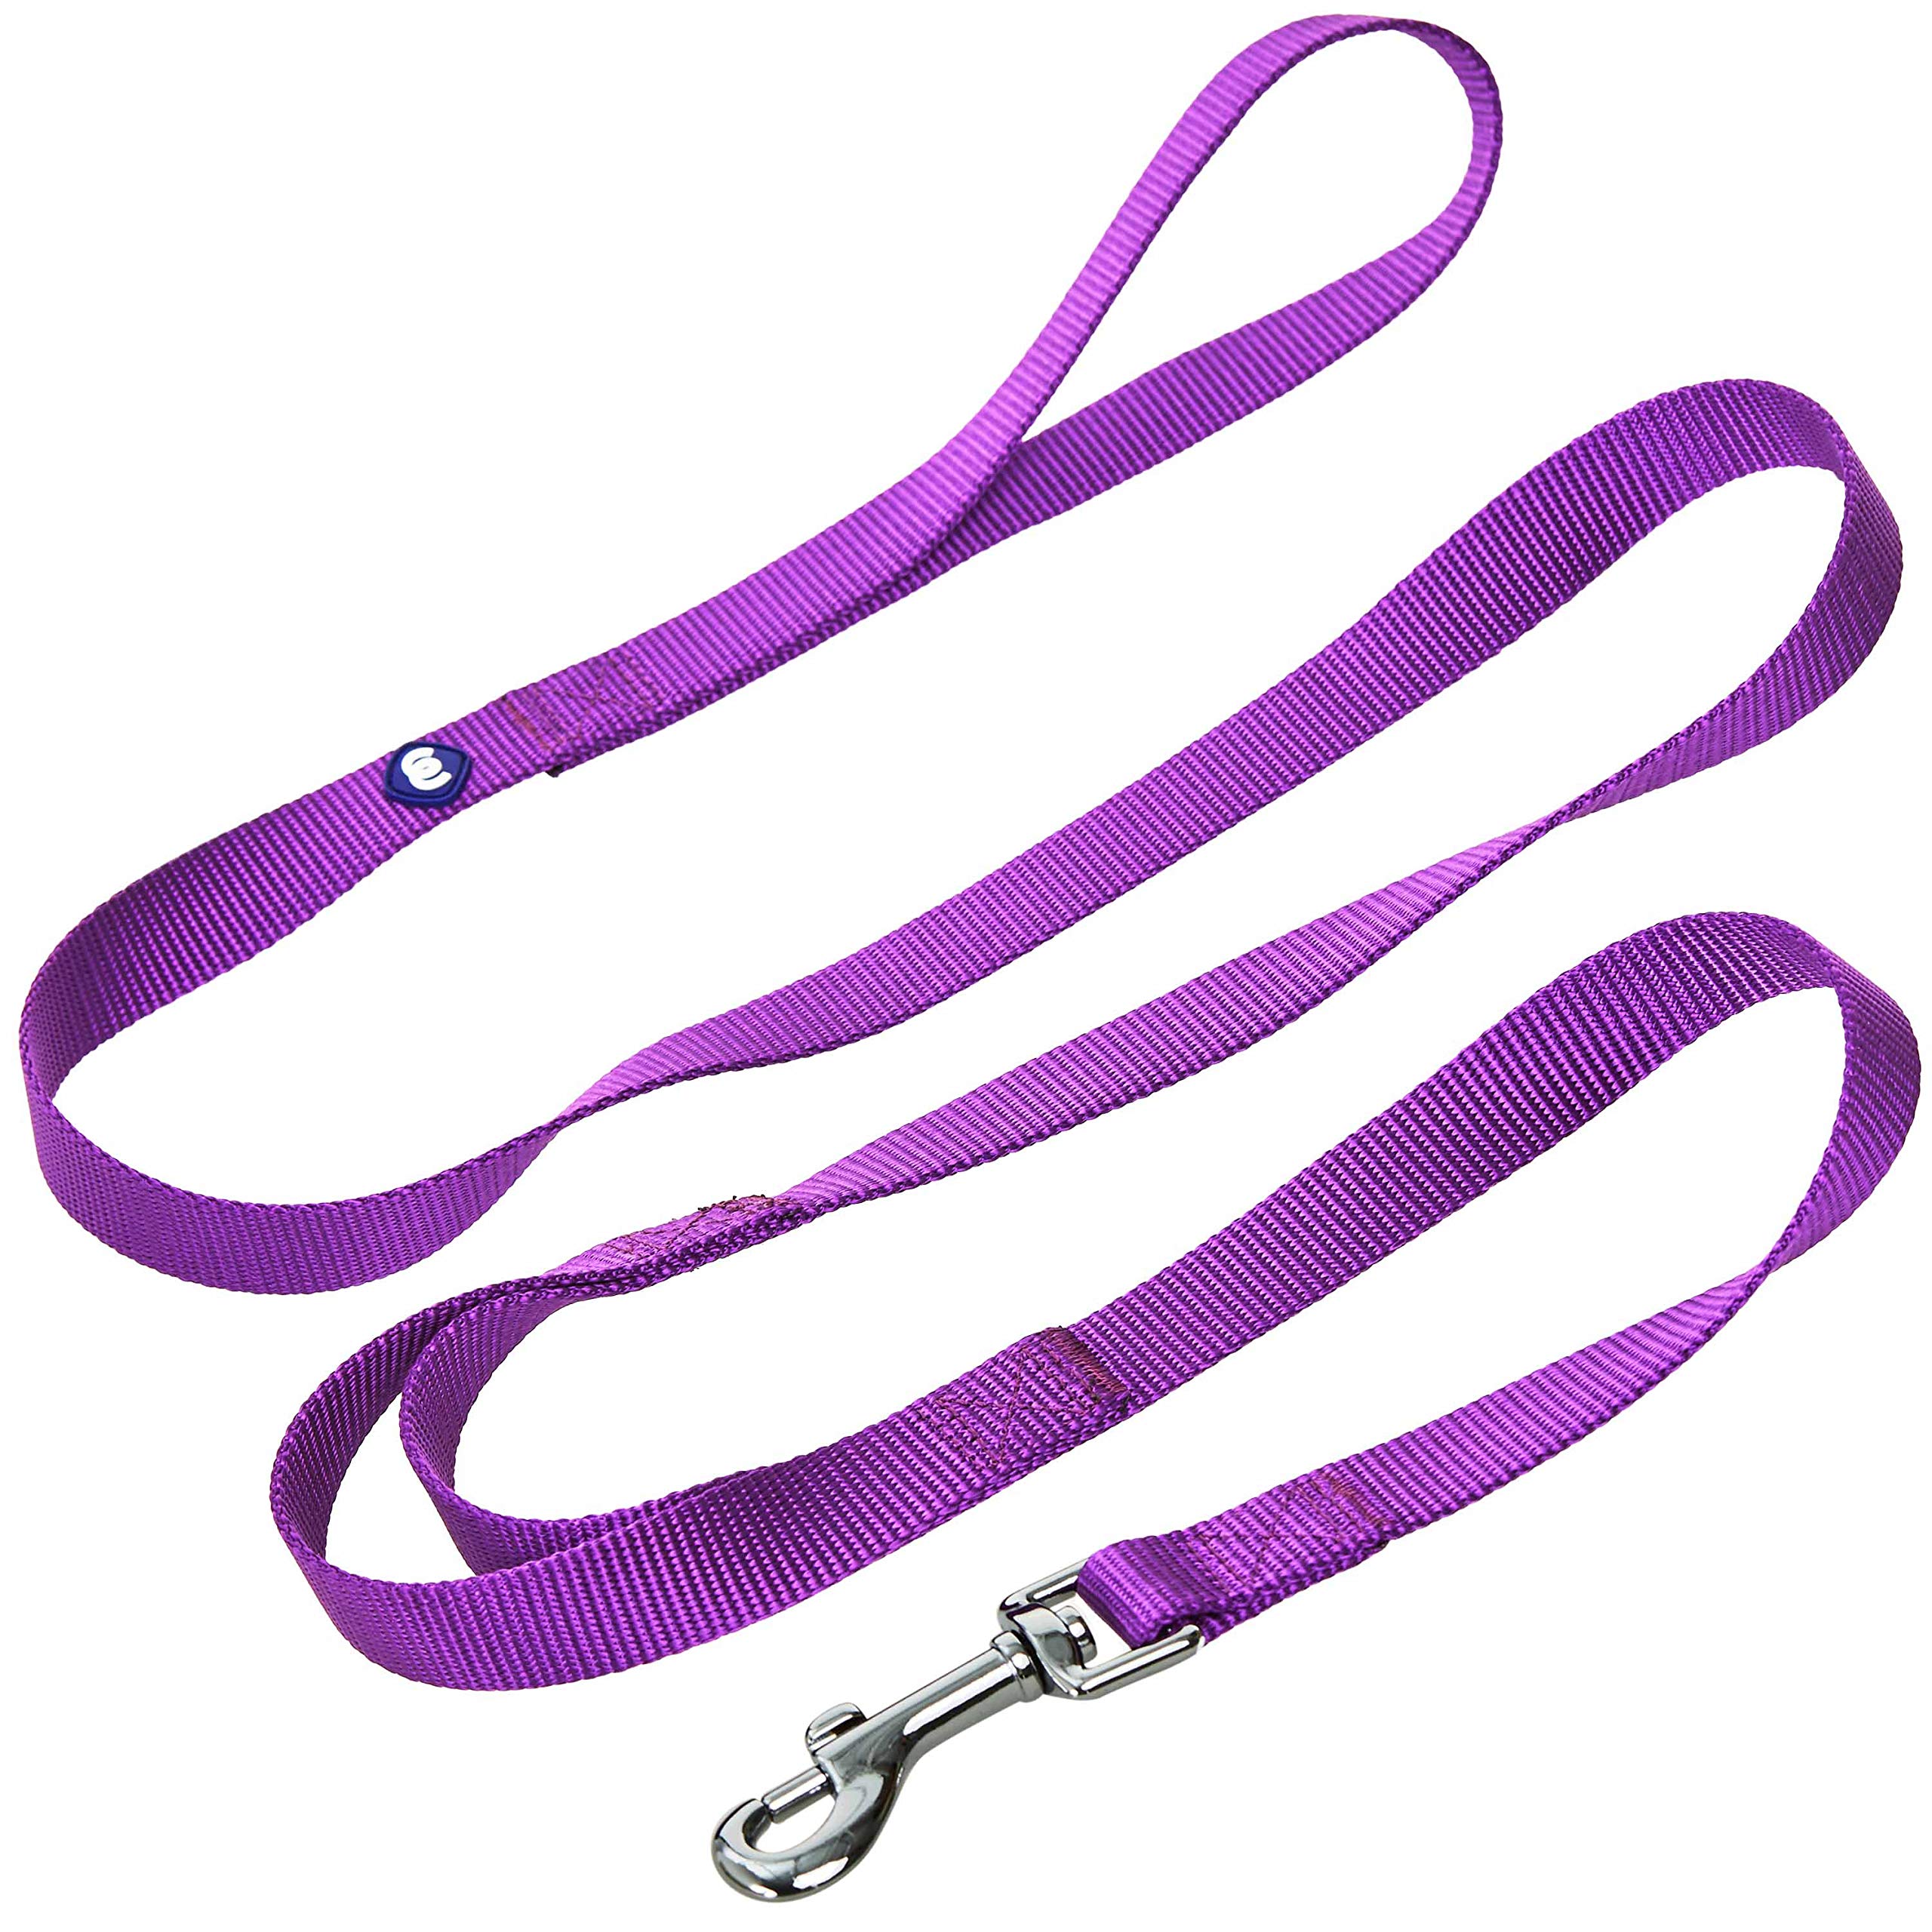 Blueberry Pet Essentials Durable Classic Dog Leash 4 ft x 1", Dark Orchid, Large, Double Handle Leashes for Dogs